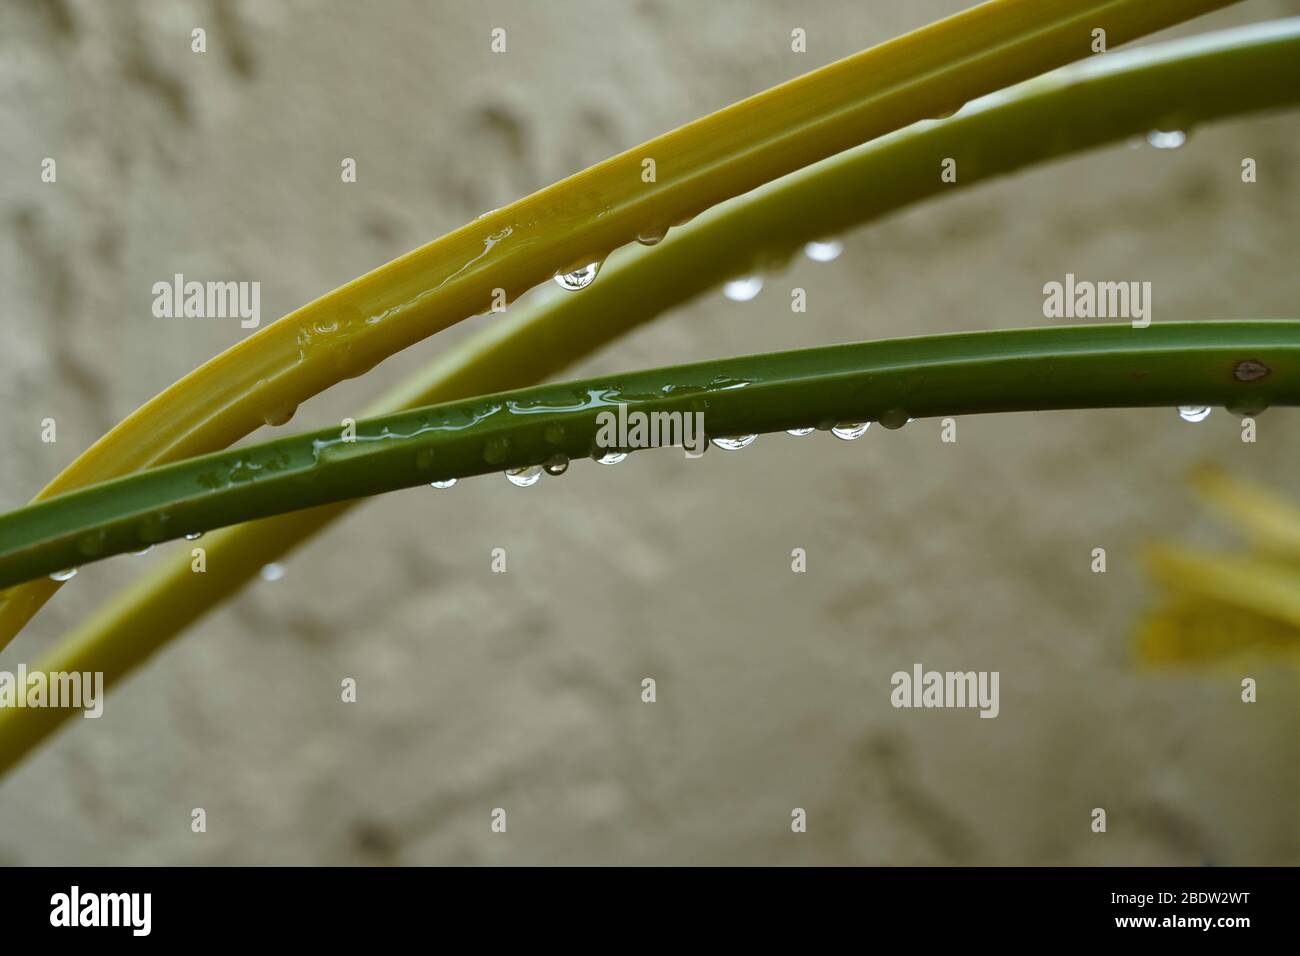 Three green or yellow plant stalks curve through the frame, with many bright silver raindrops hanging from them. Soft focus, lots of copy space. Stock Photo